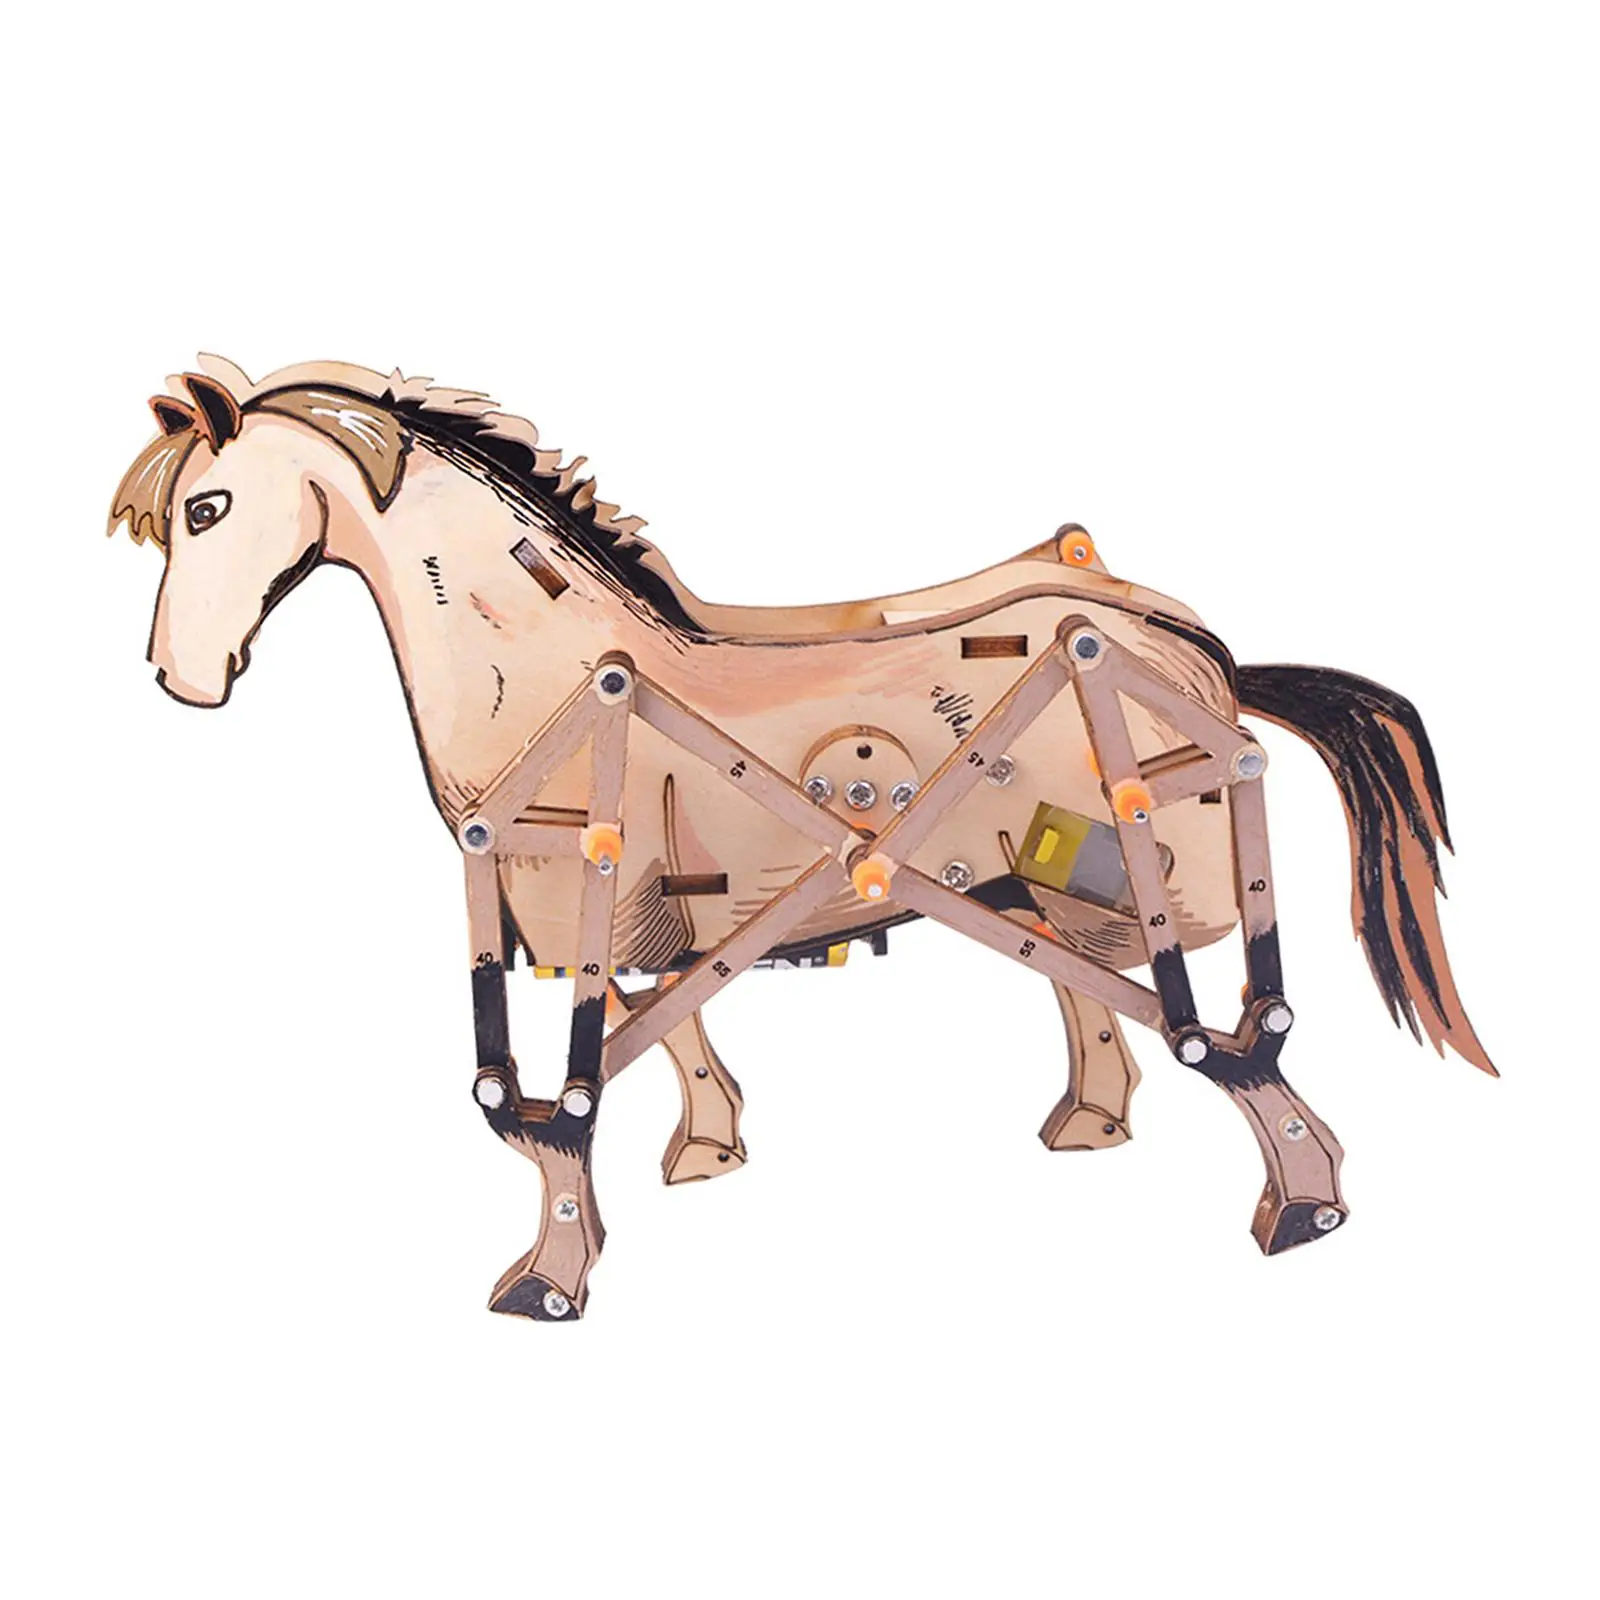 3D Mechanical Horse Interaction Woodcraft horse Model Learning Wooden